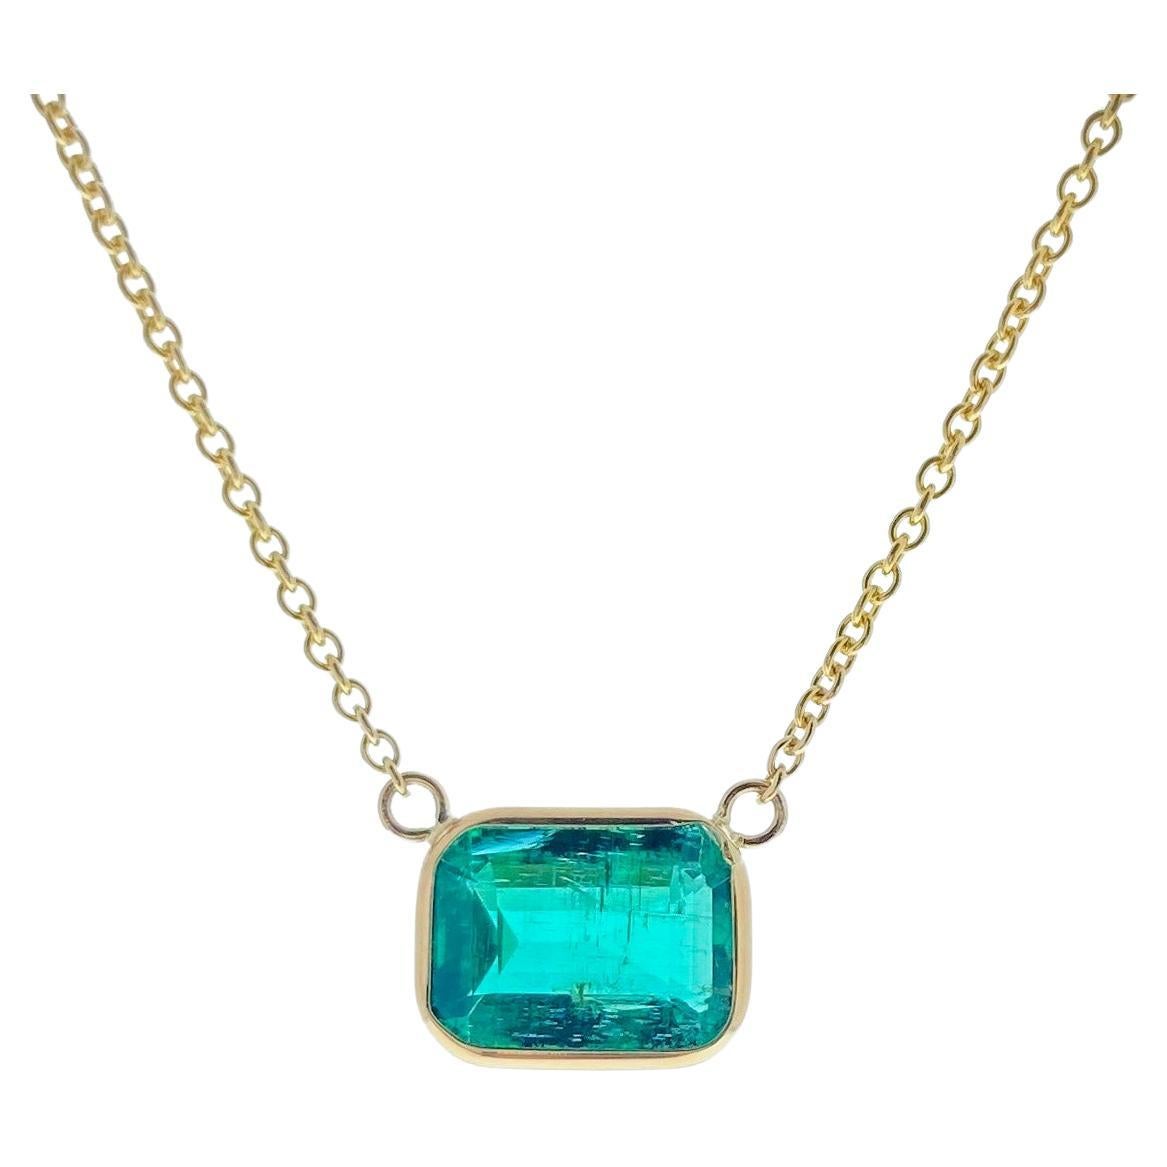 2.12 Carat Green Emerald Oct Cut Fashion Necklaces In 14K Yellow Gold For Sale